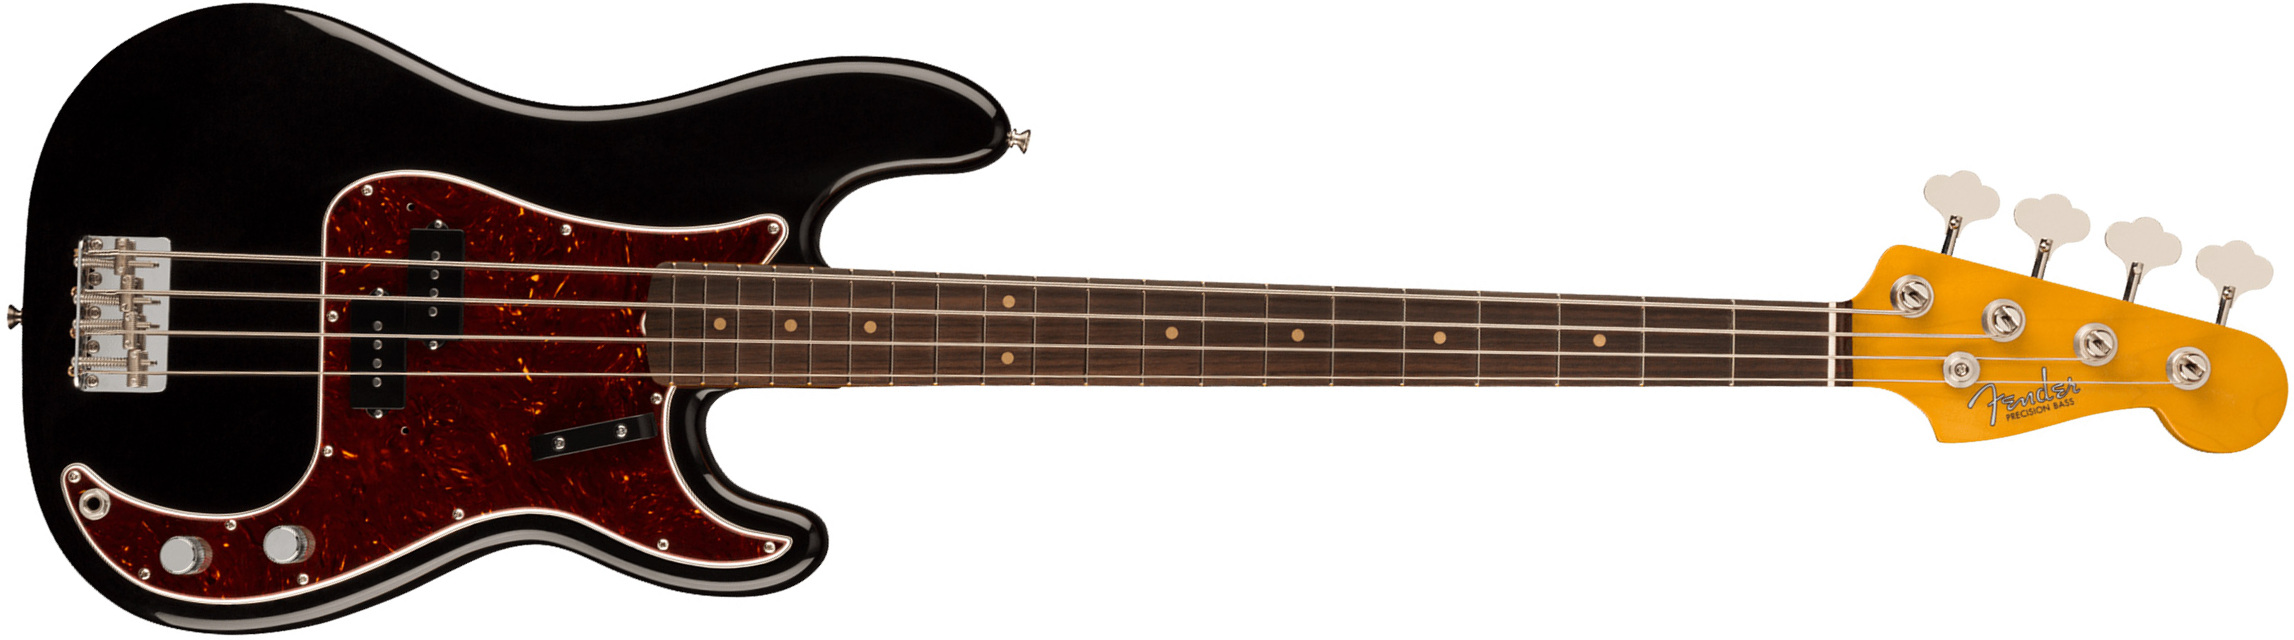 Fender Precision Bass 1960 American Vintage Ii Usa Rw - Black - Solid body electric bass - Main picture